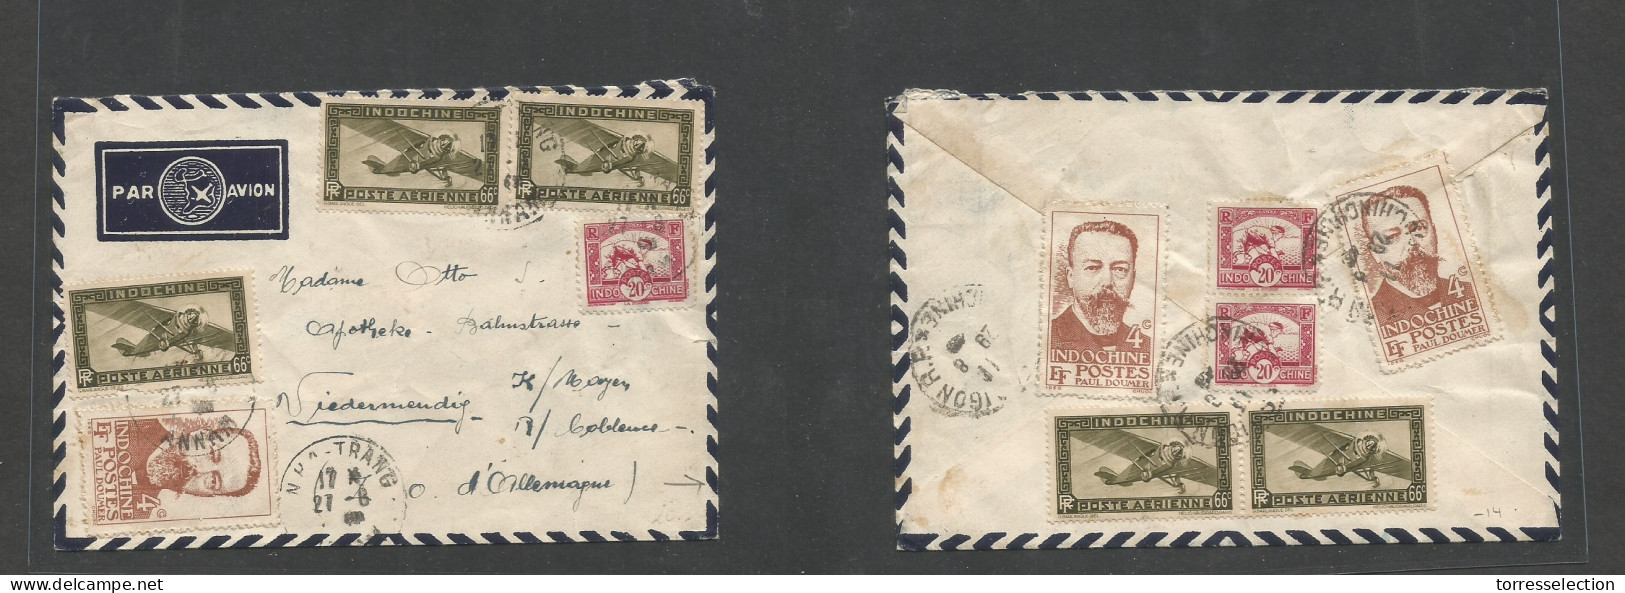 INDOCHINA. C. 1932. Nha Trang - Germany, Viedermendig. Air Multifkd Front And Reverse. Fine Used. SALE. - Andere-Azië